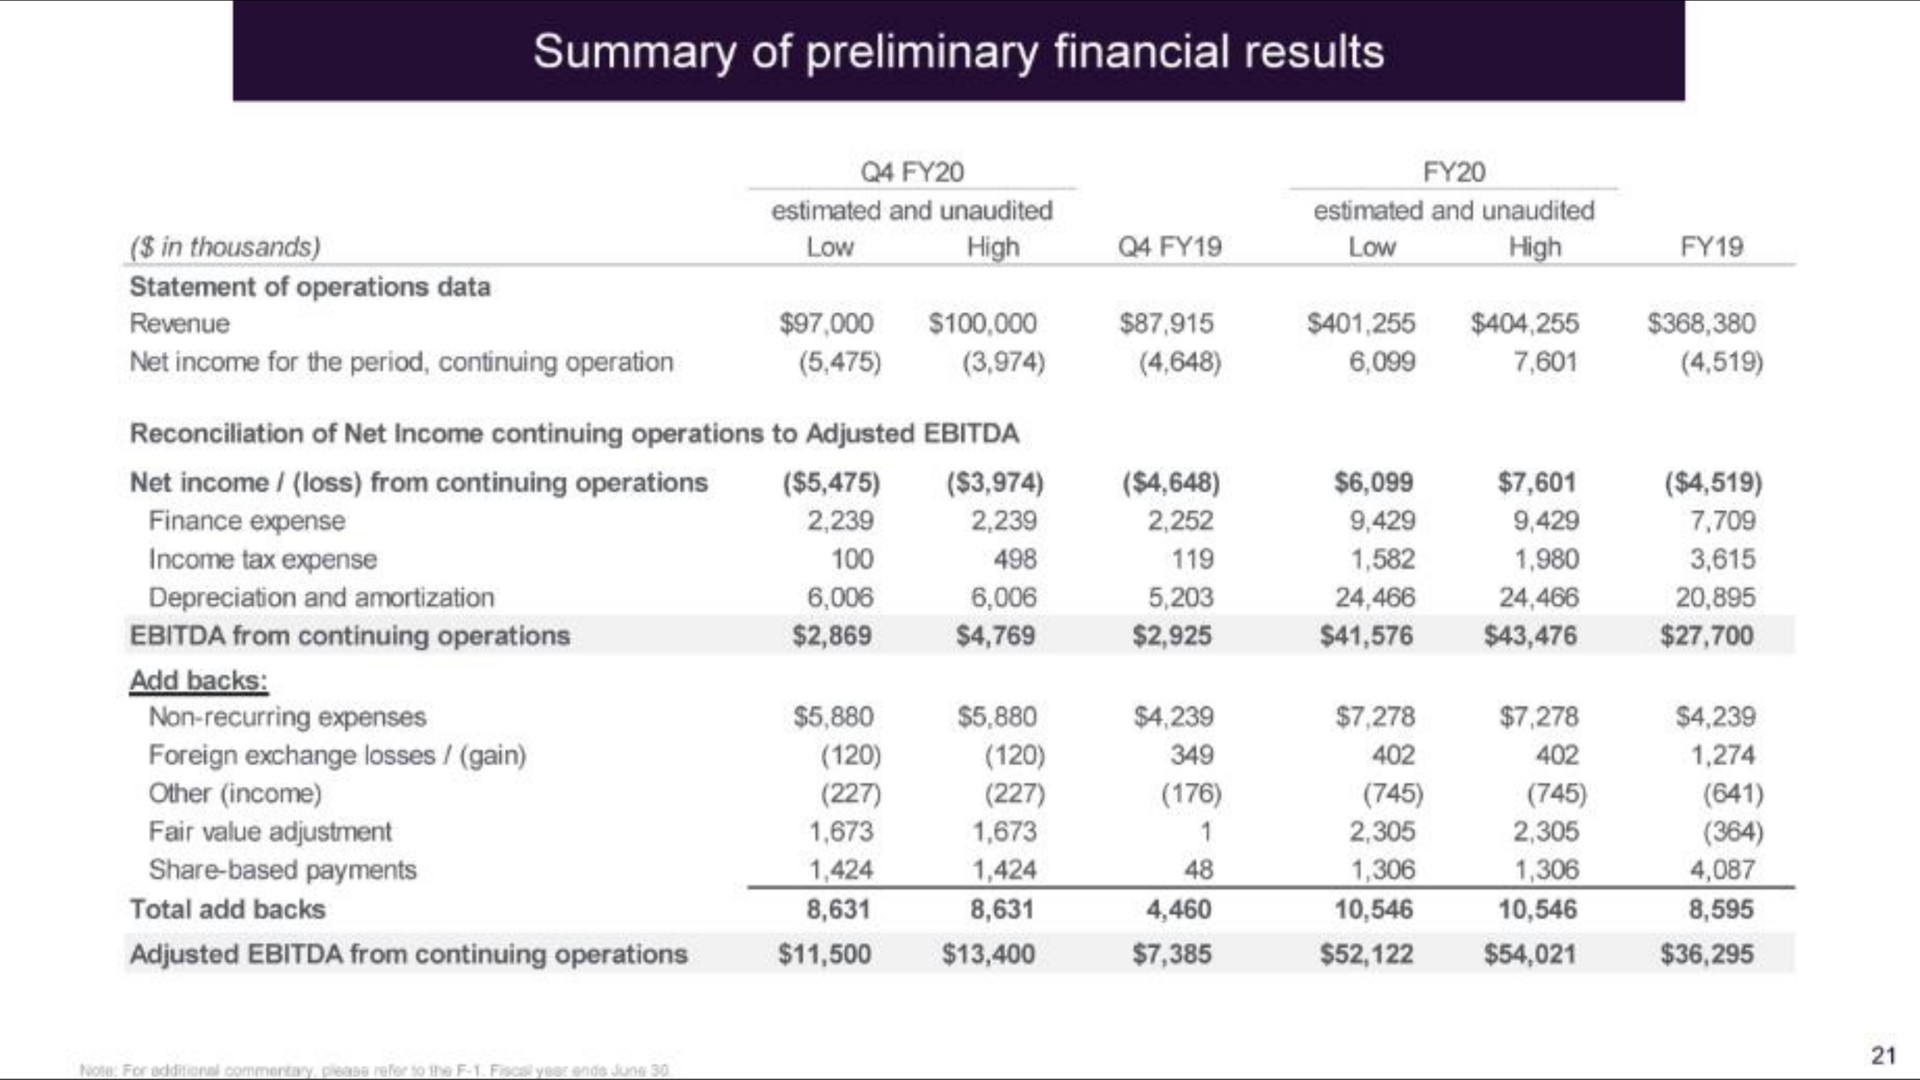 summary of preliminary financial results | IBEX